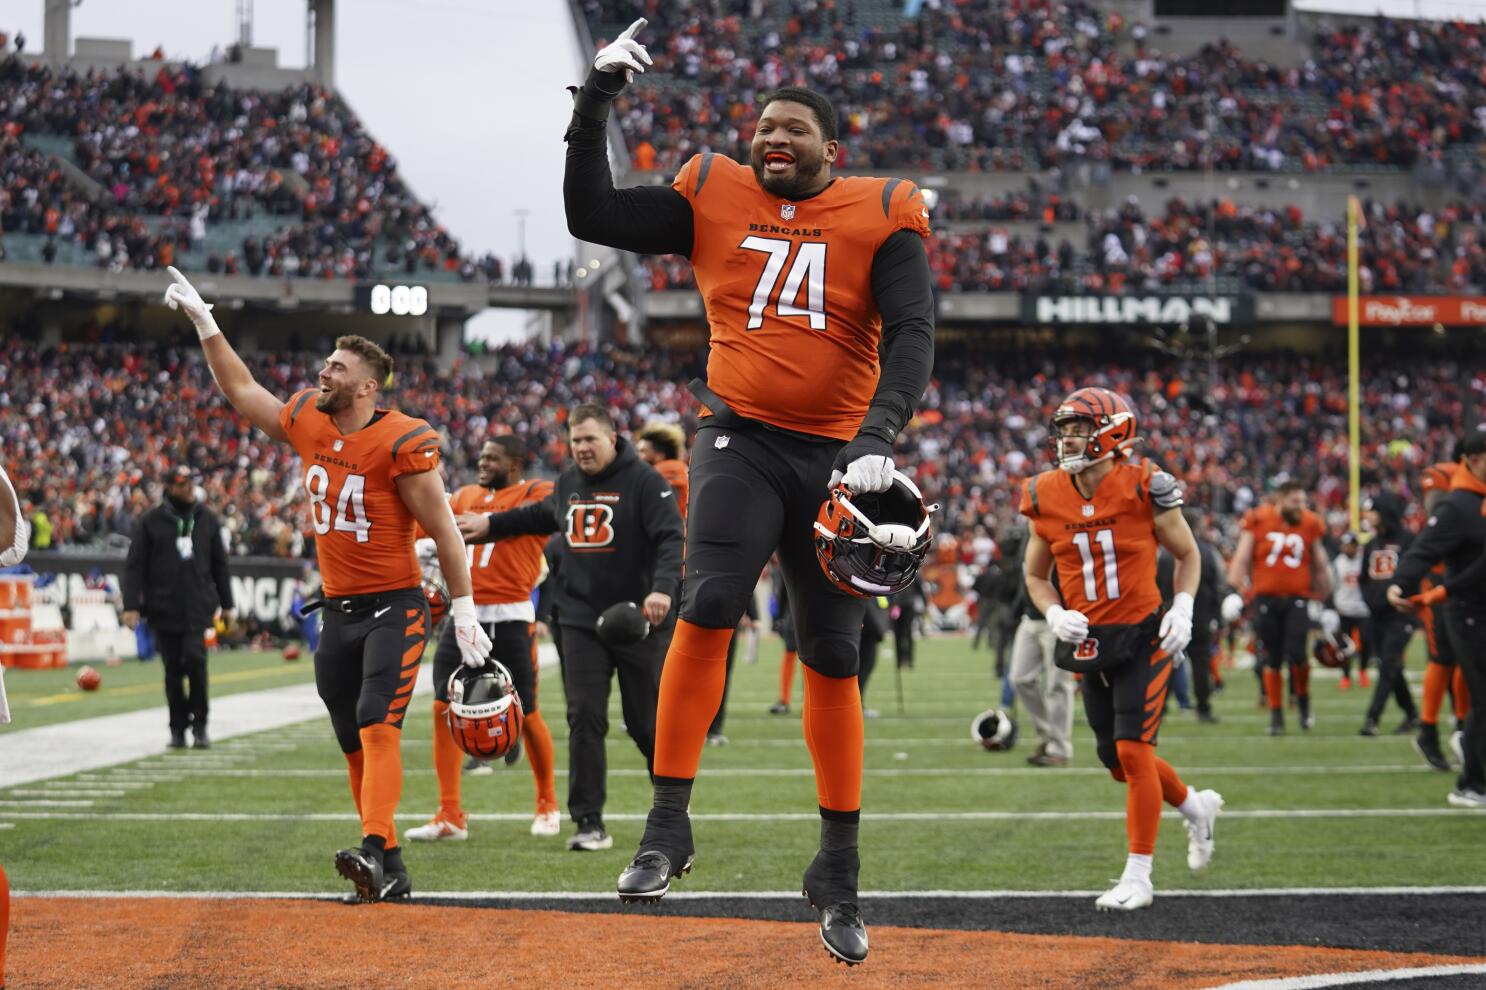 Bengals clinch AFC North and first playoff since 2015 season